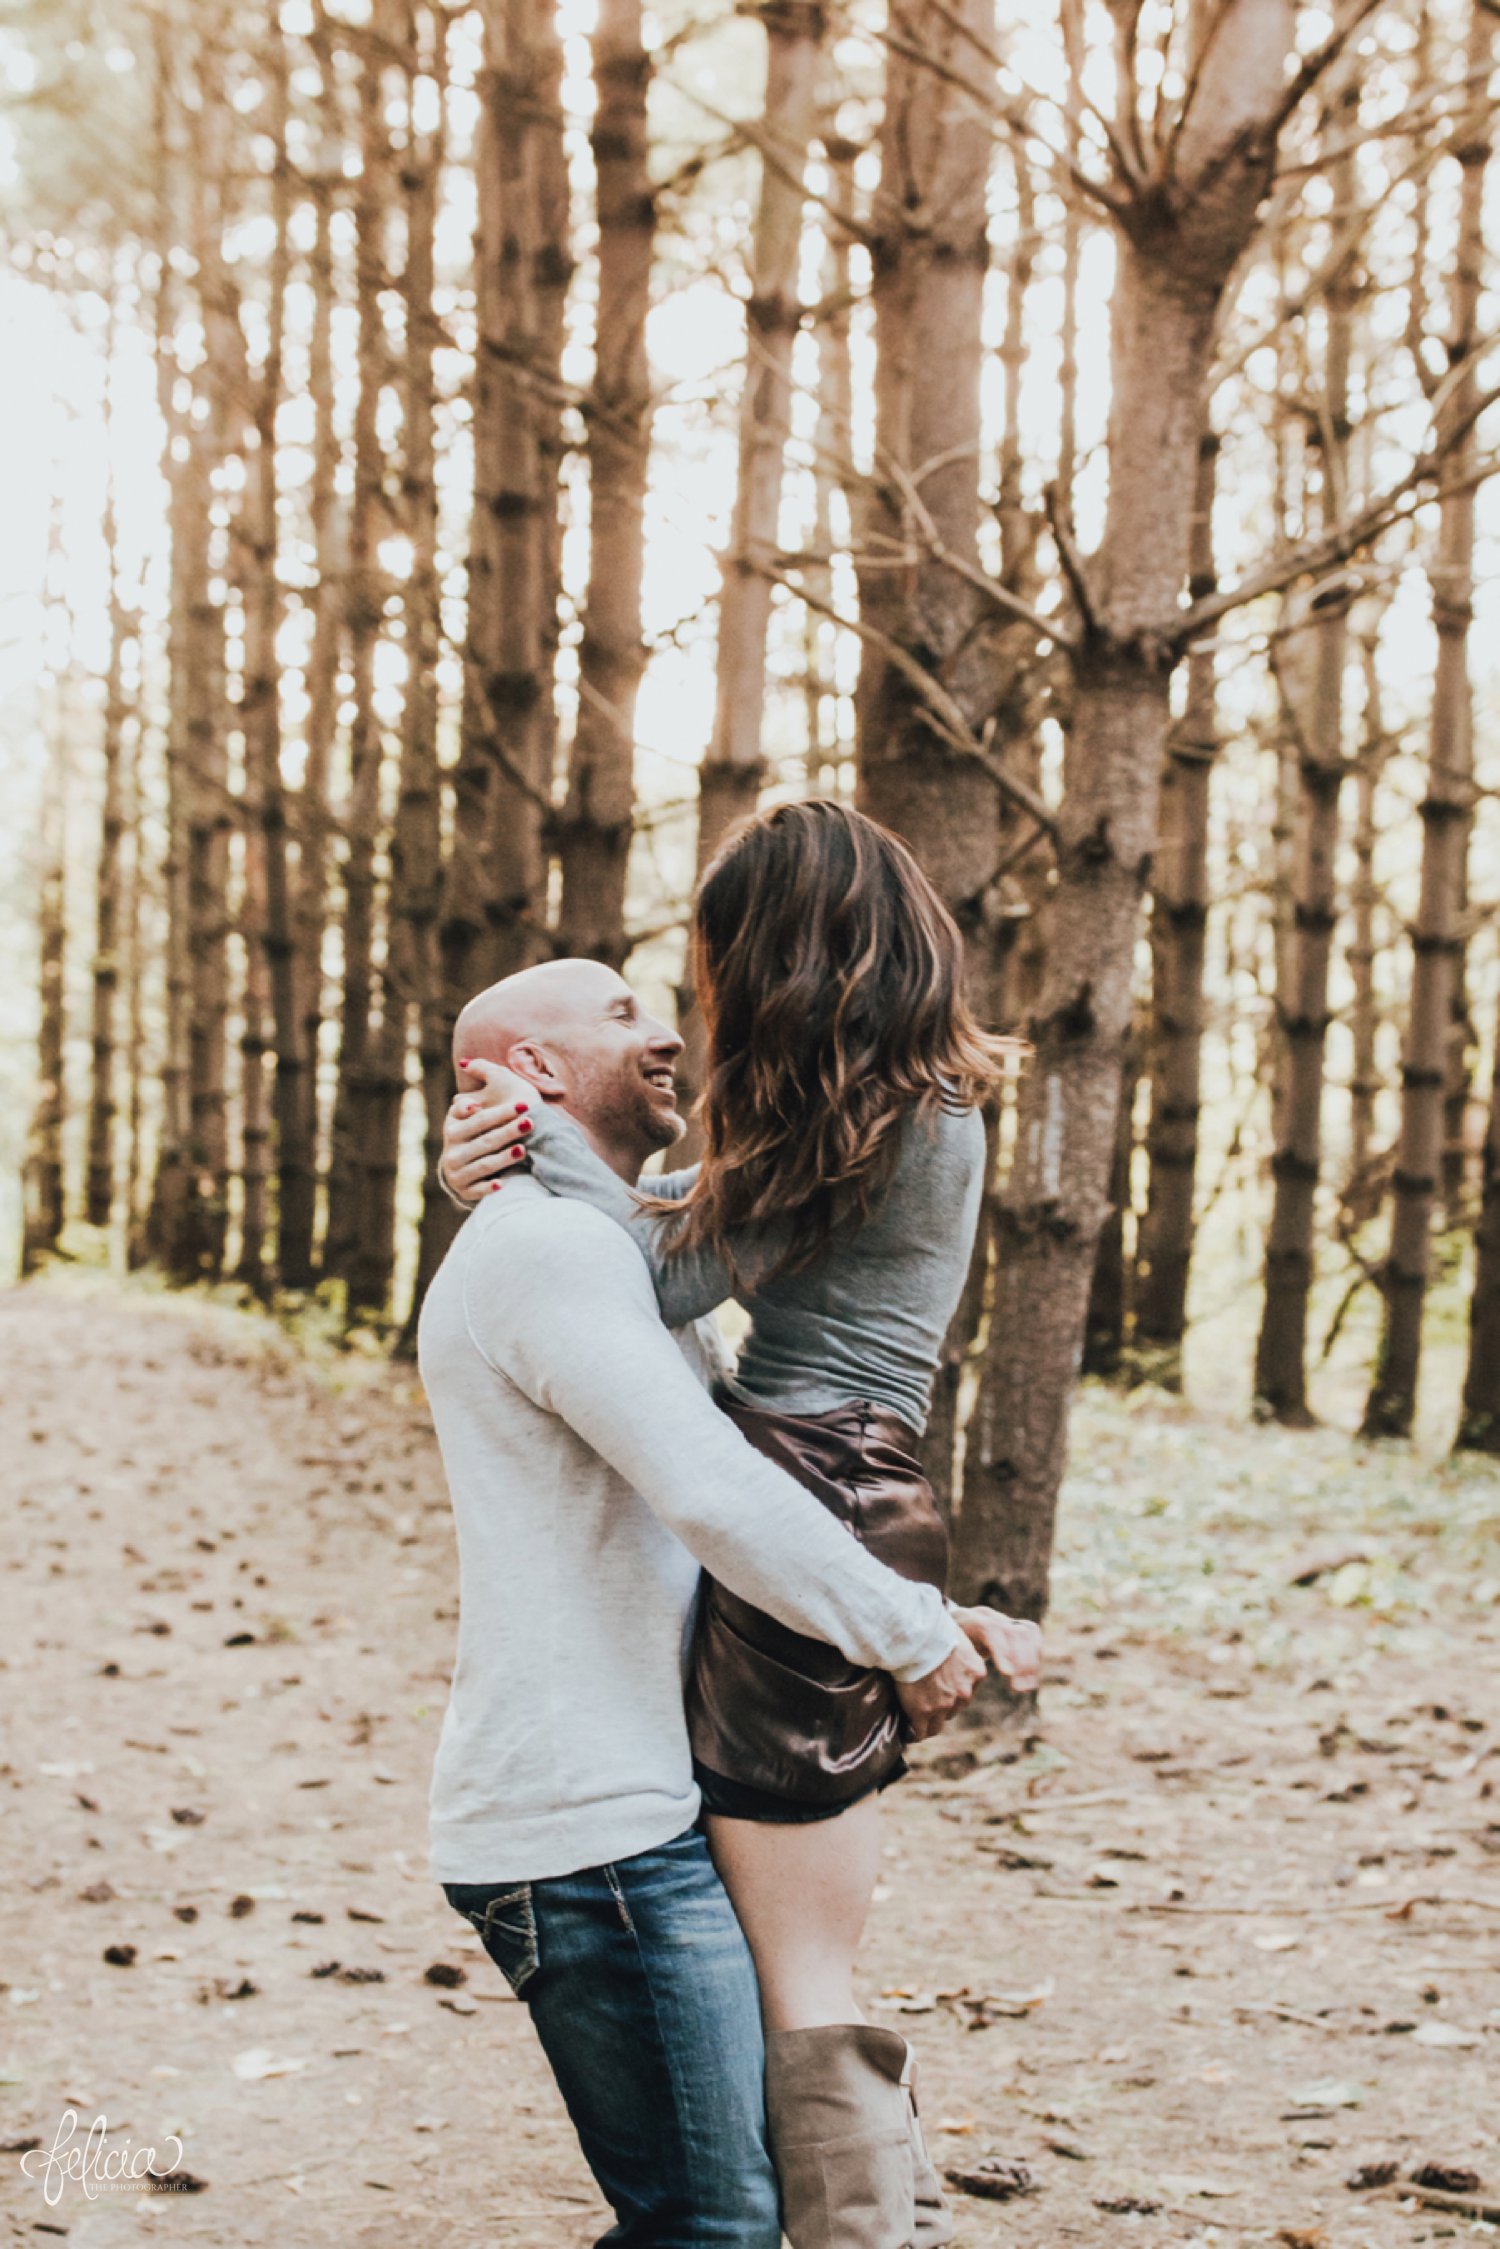 images by feliciathephotographer.com | destination wedding photographer | family portraits | fall attire | autumn | woodland setting | forest | casual | jeans | corduroy | sparkly boots | fur vest | toddlers | hipster | playful | parents and kiddos | father mother | lumber | romantic | couple | 